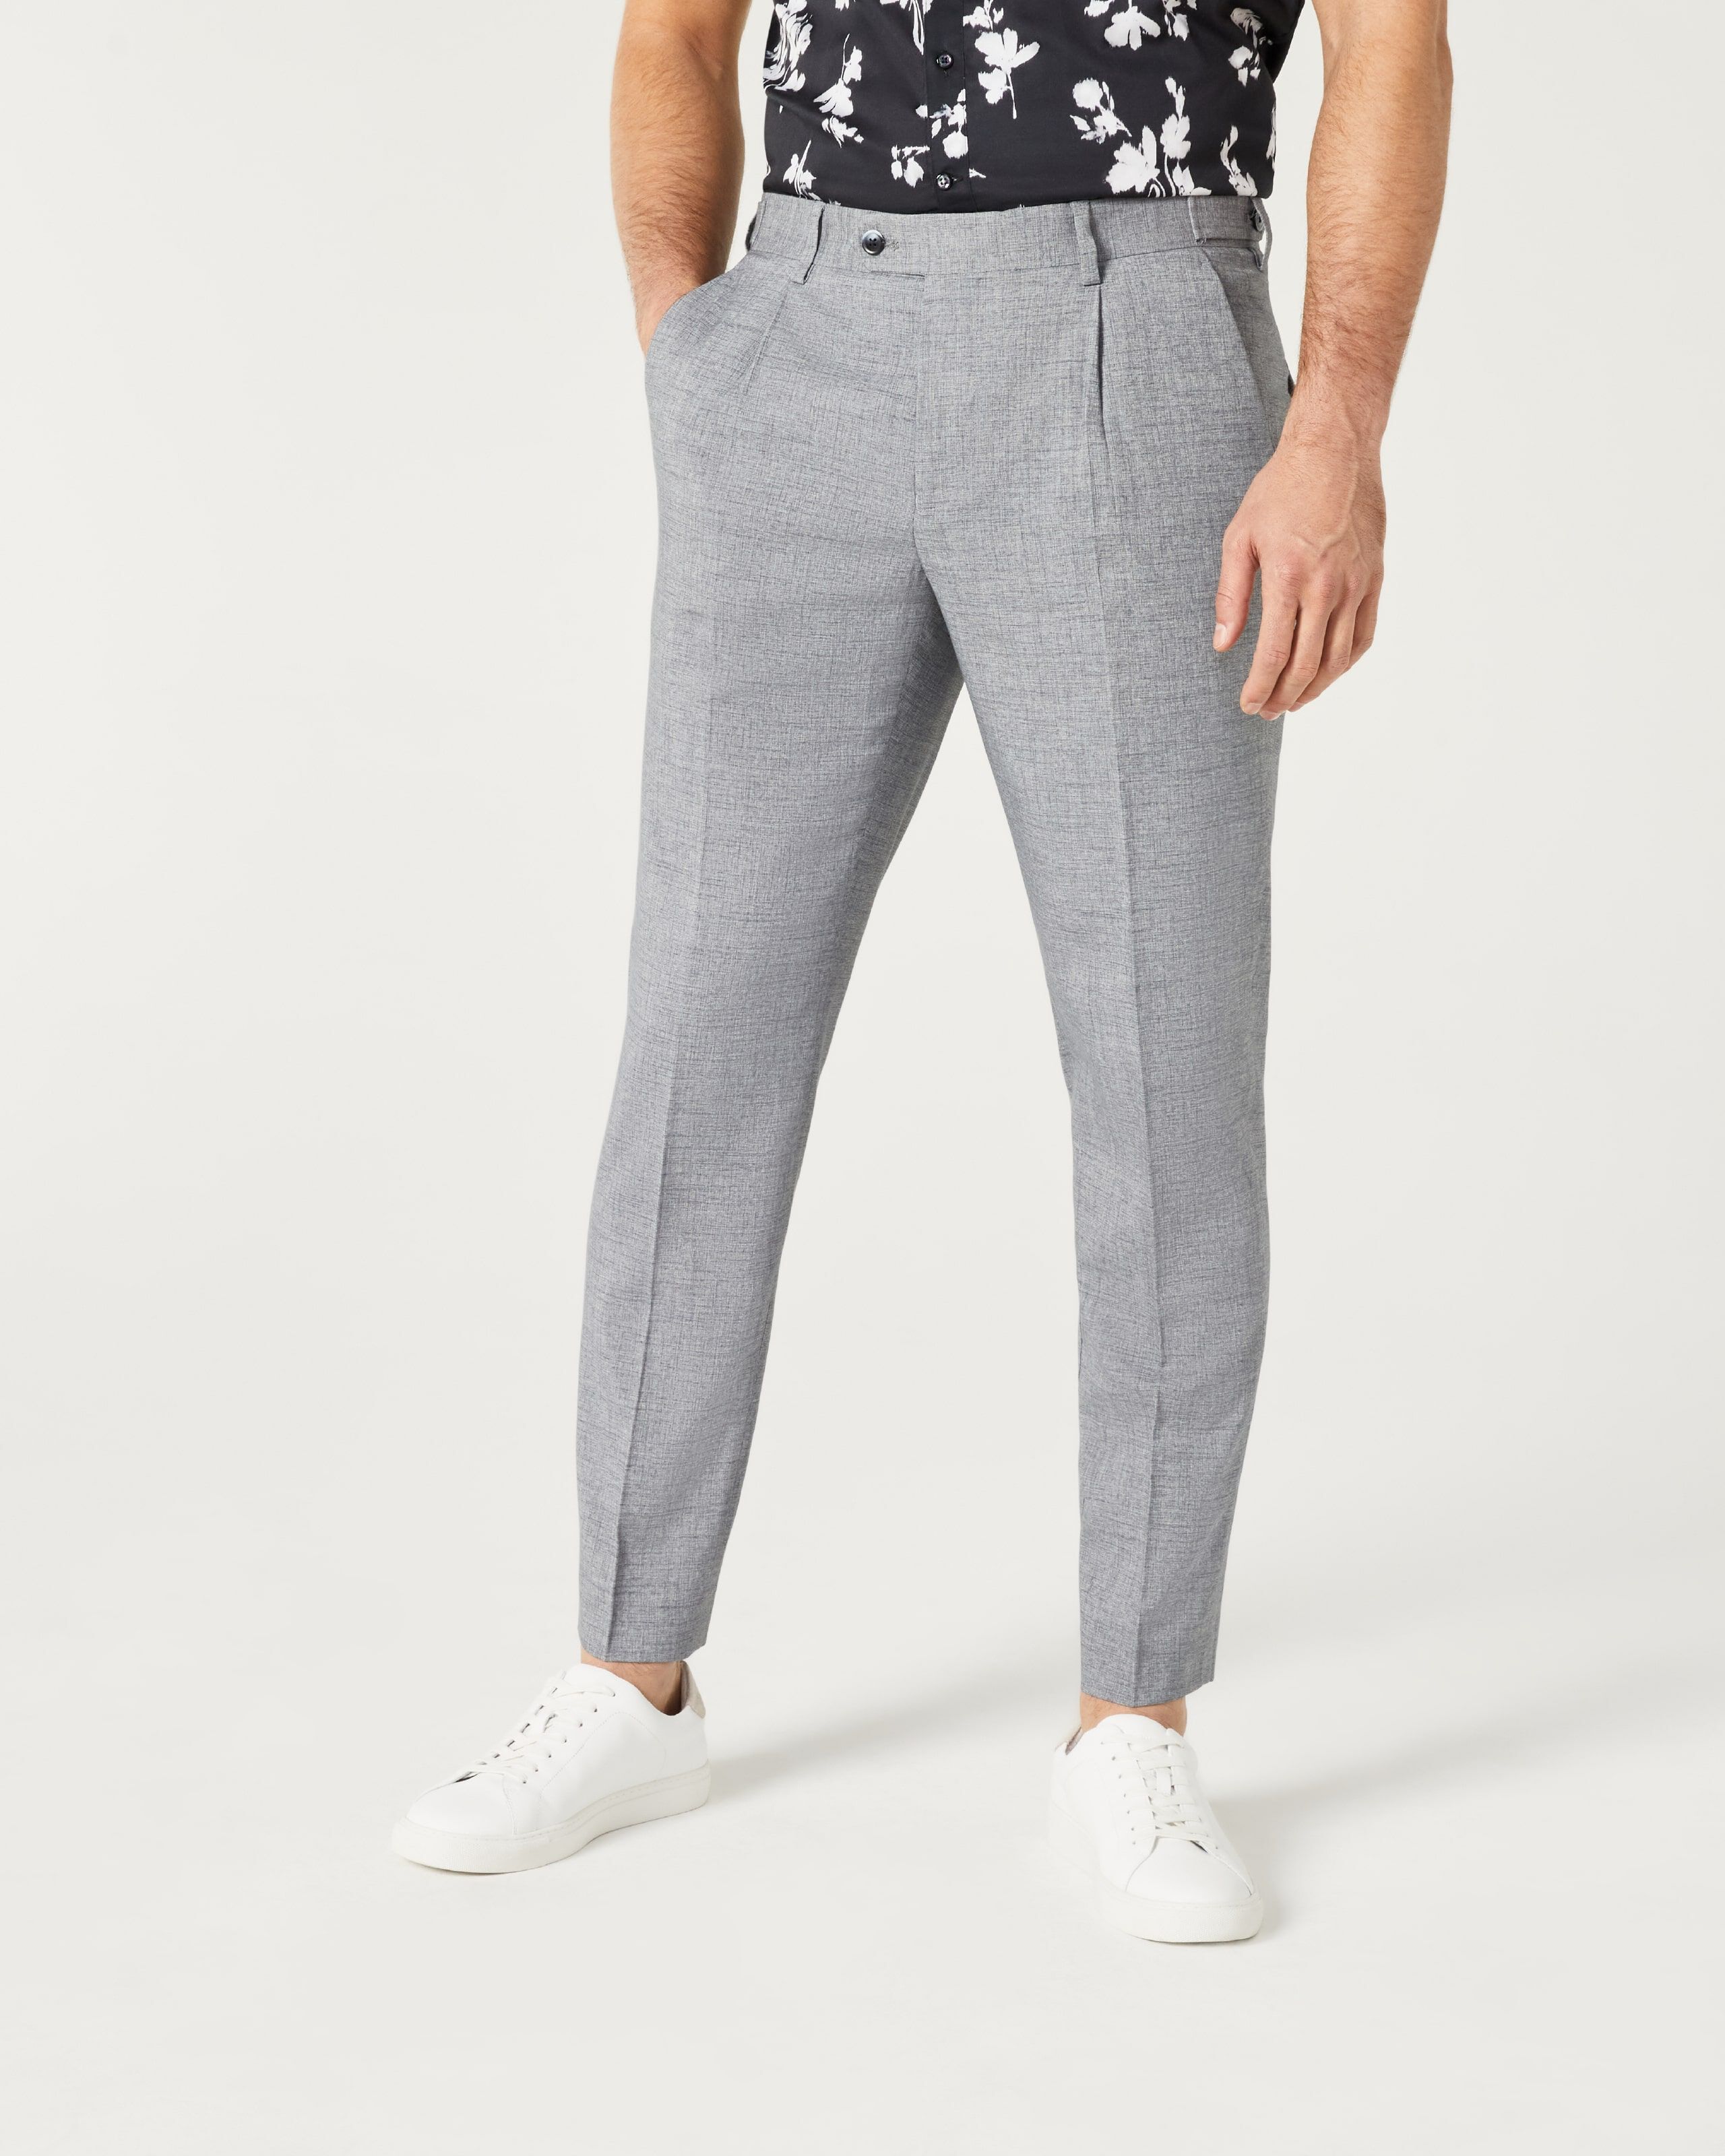 Buy Men's Charcoal Grey Power Stretch Pants Online In India